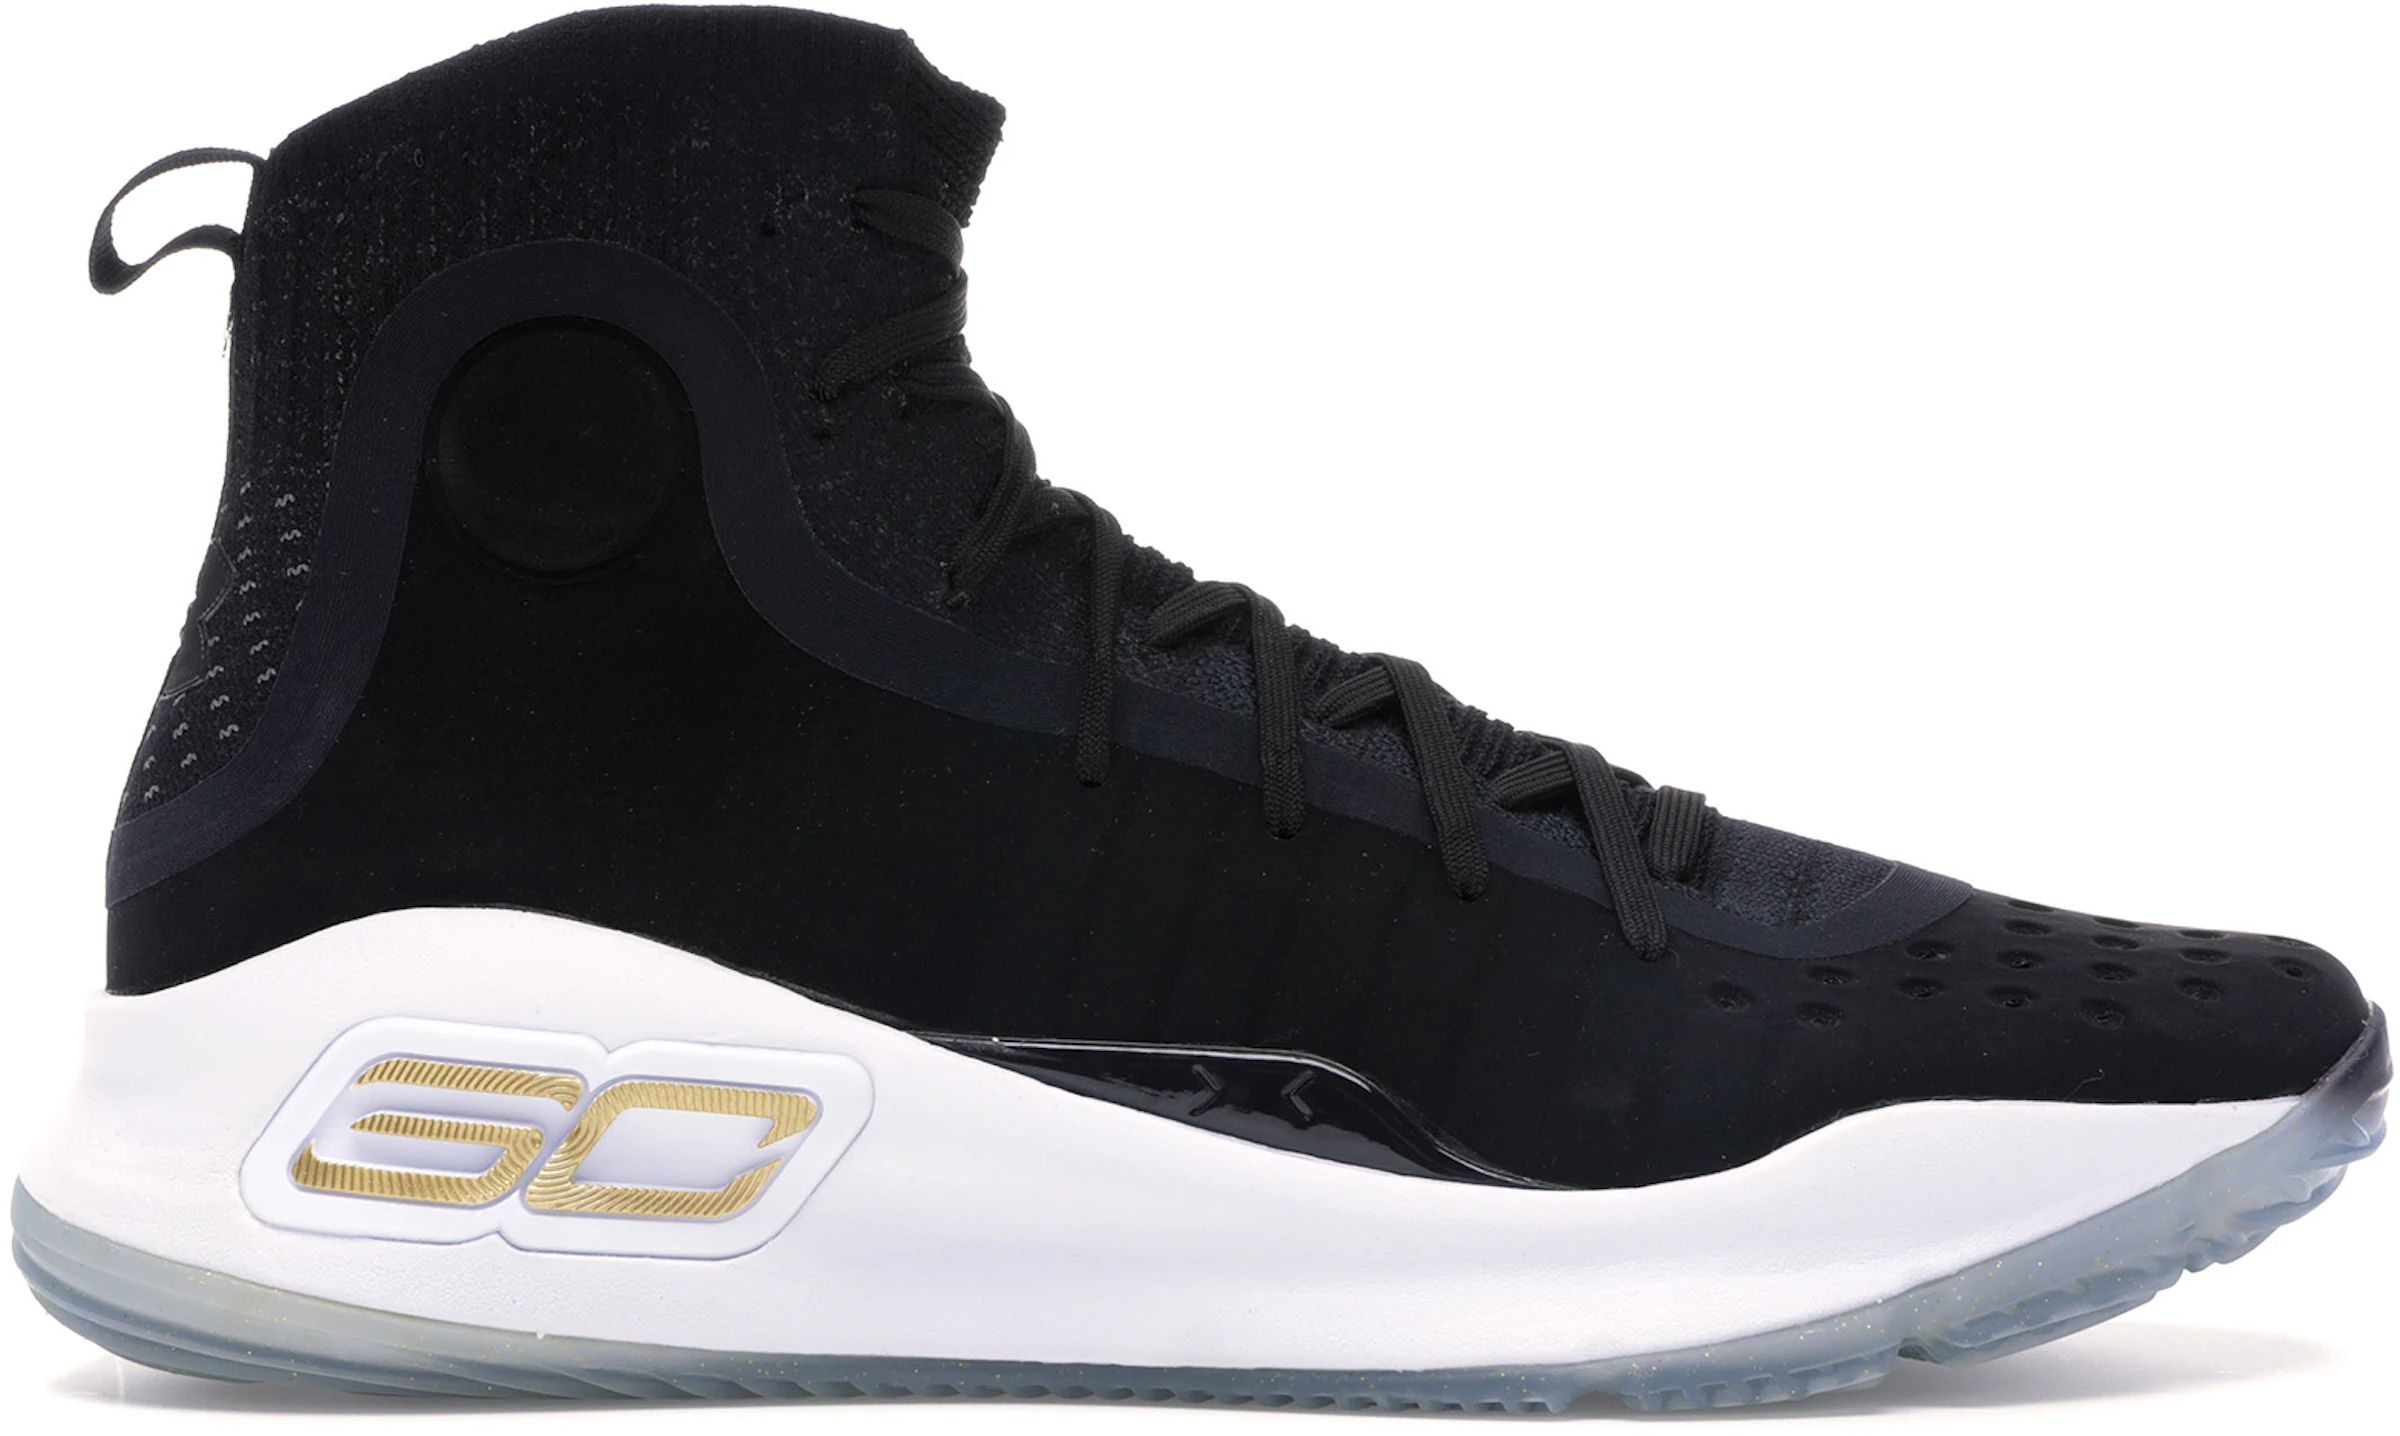 Under Armour Curry 4 More Dimes - 1298306-001 - GB